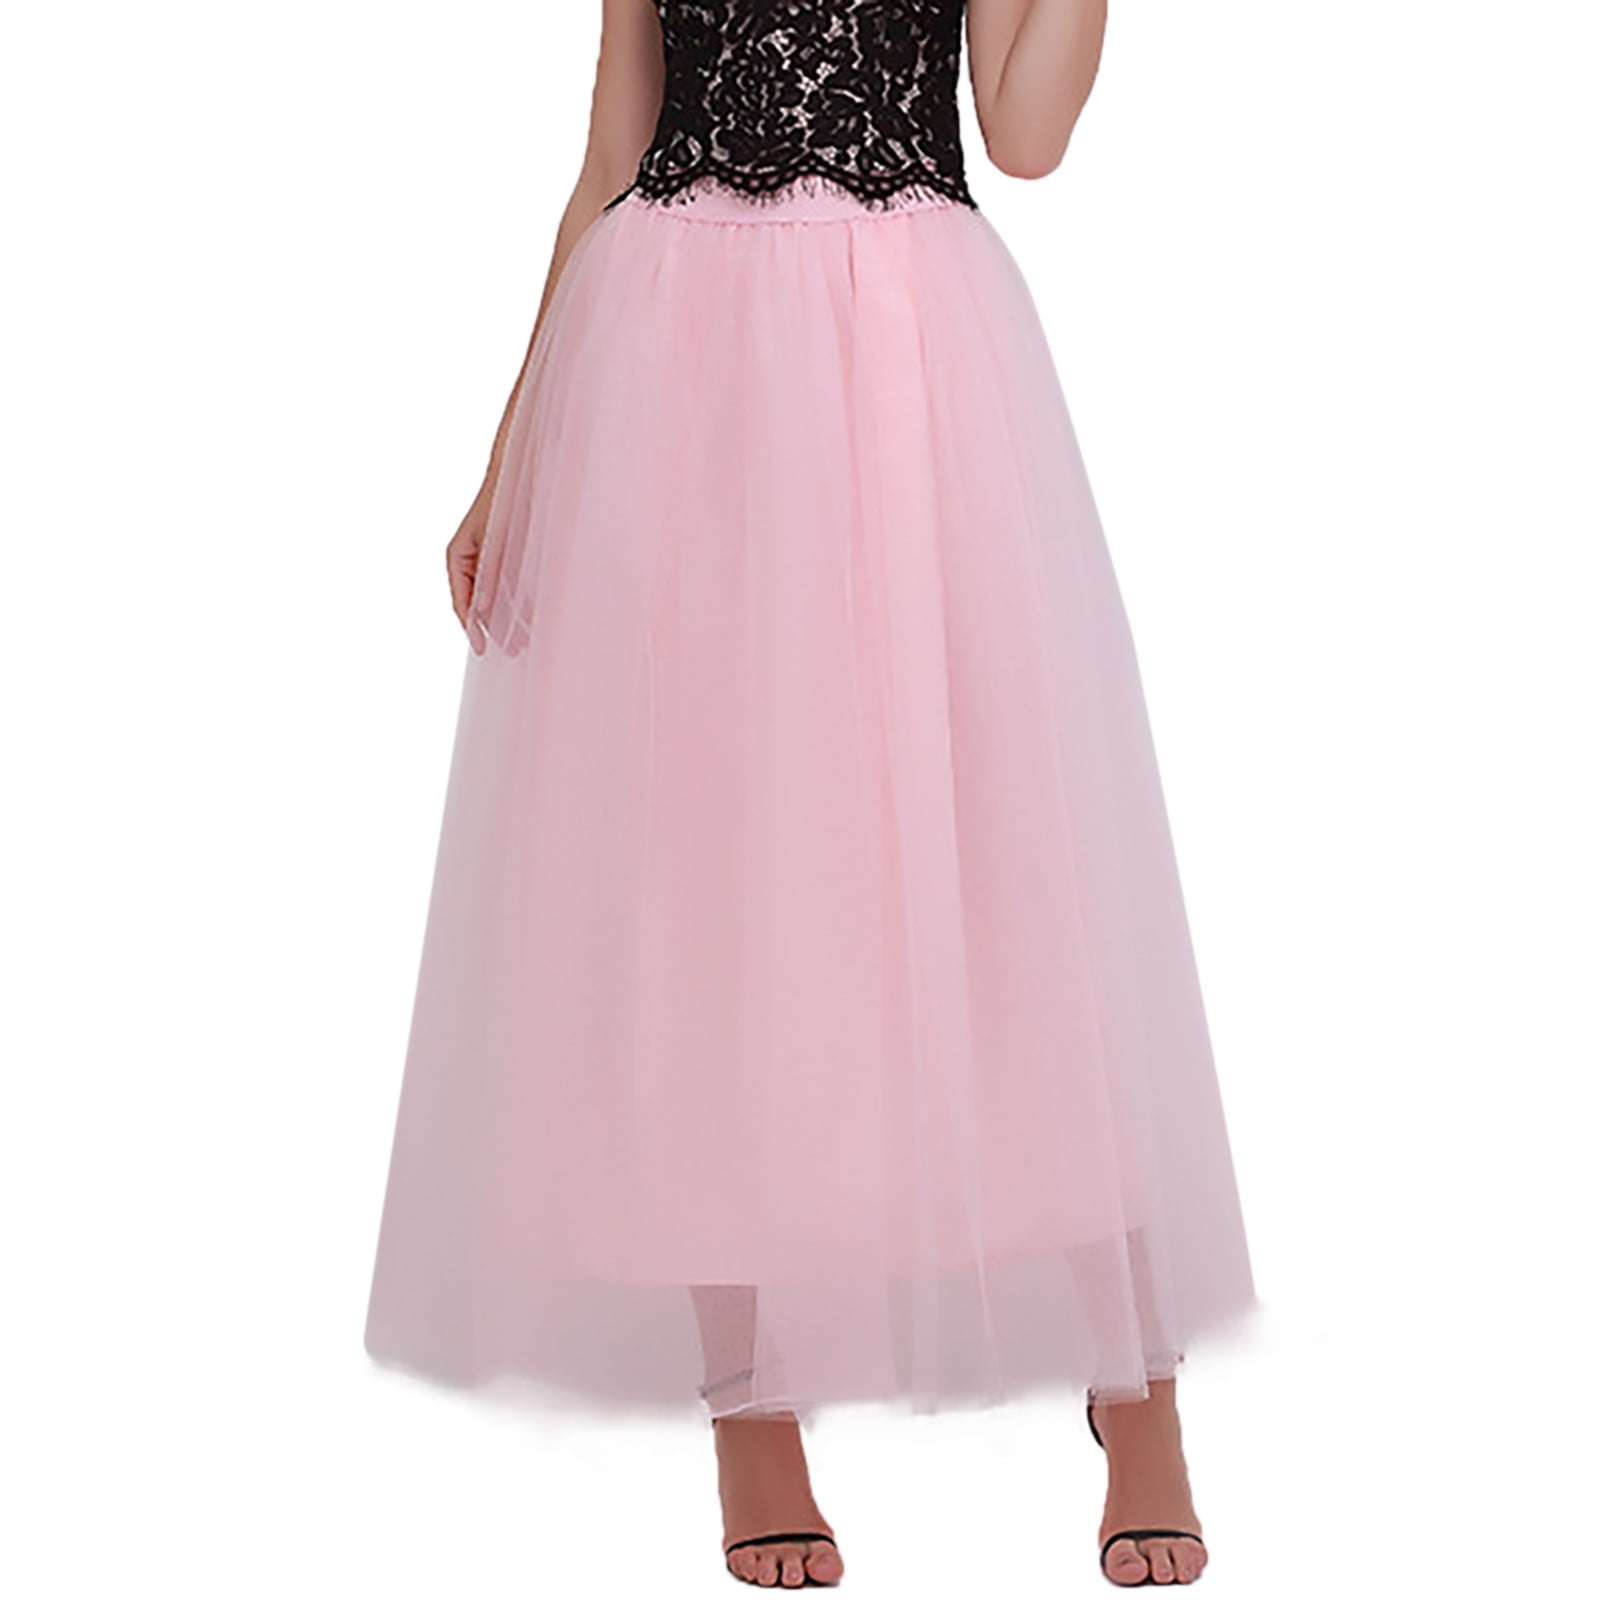 Skirts for Women Tiered Layered Mesh Ballet Prom Party Tulle Tutu A Line Midi  Skirt Women's Skirts Pink S - Walmart.com